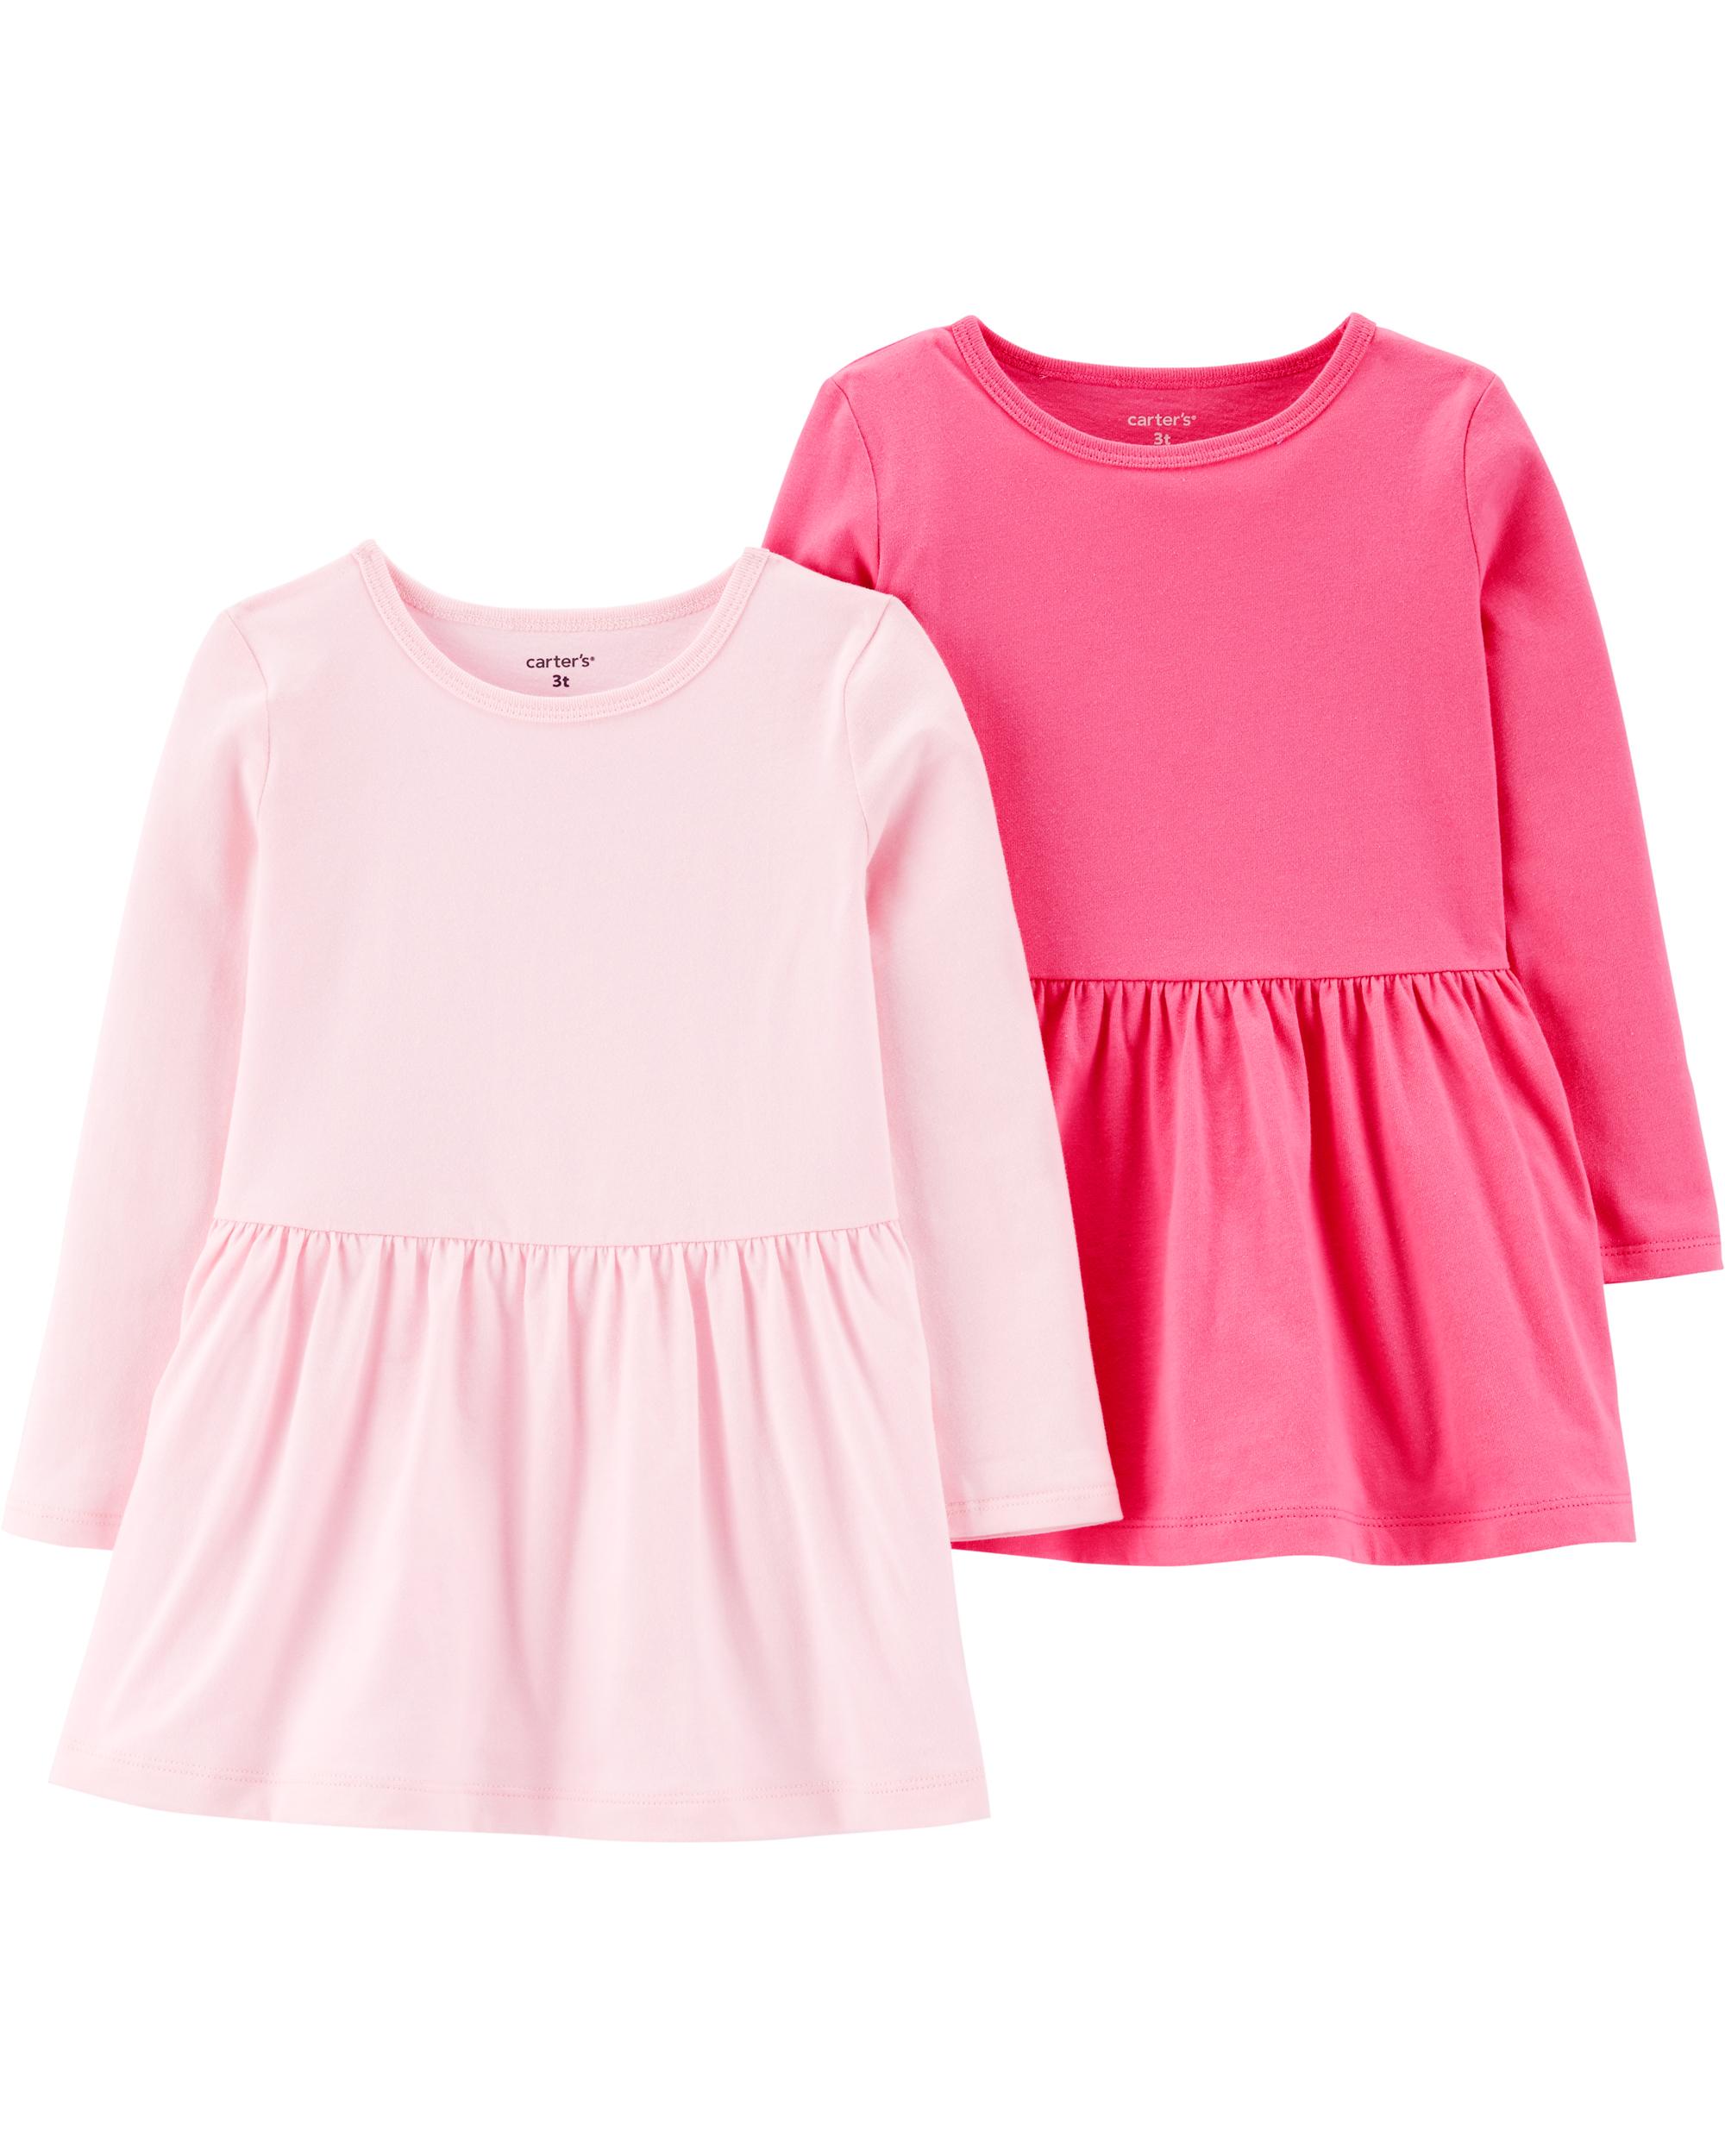 carters girls 2 pack shirts Size 3T